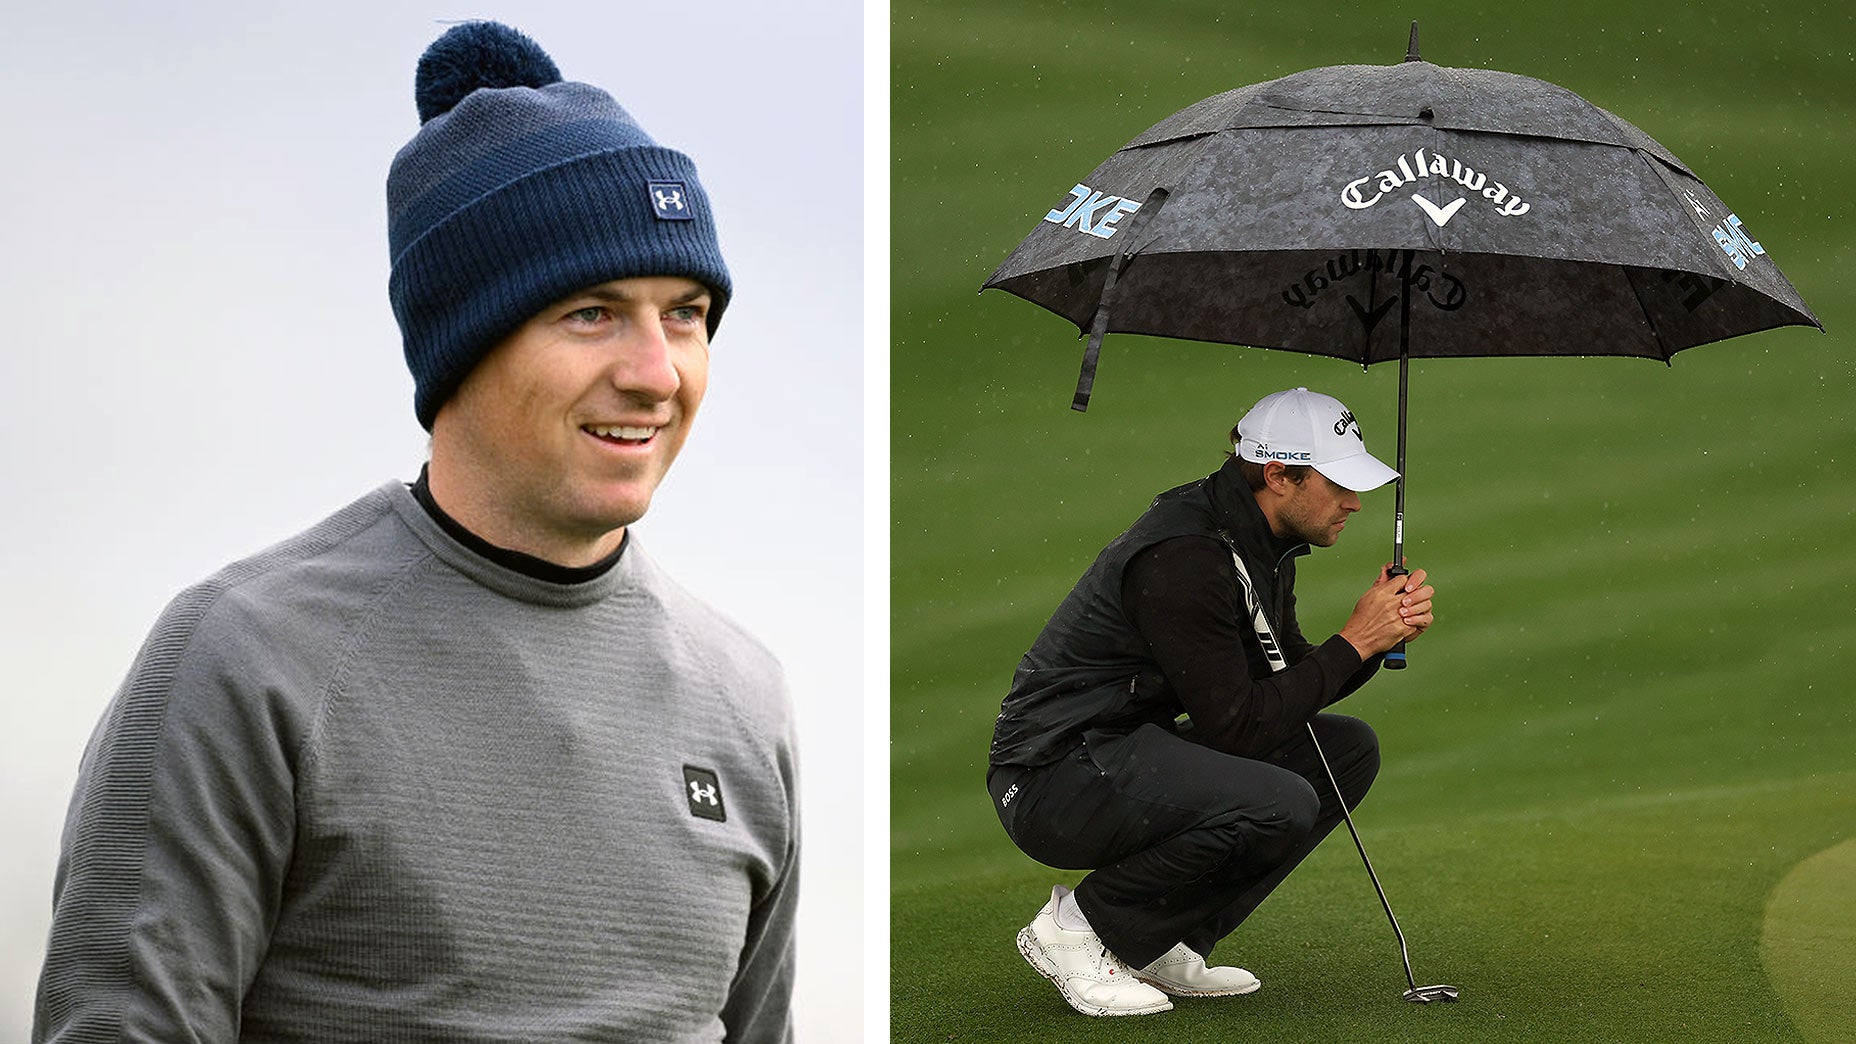 It's operation "stay dry" at TPC Scottsdale. Here are 3 ways pros and their caddies are keeping themselves warm and dry on the course today. Left: Ben Jared/PGA TOUR via Getty Right: Christian Petersen/Getty Images